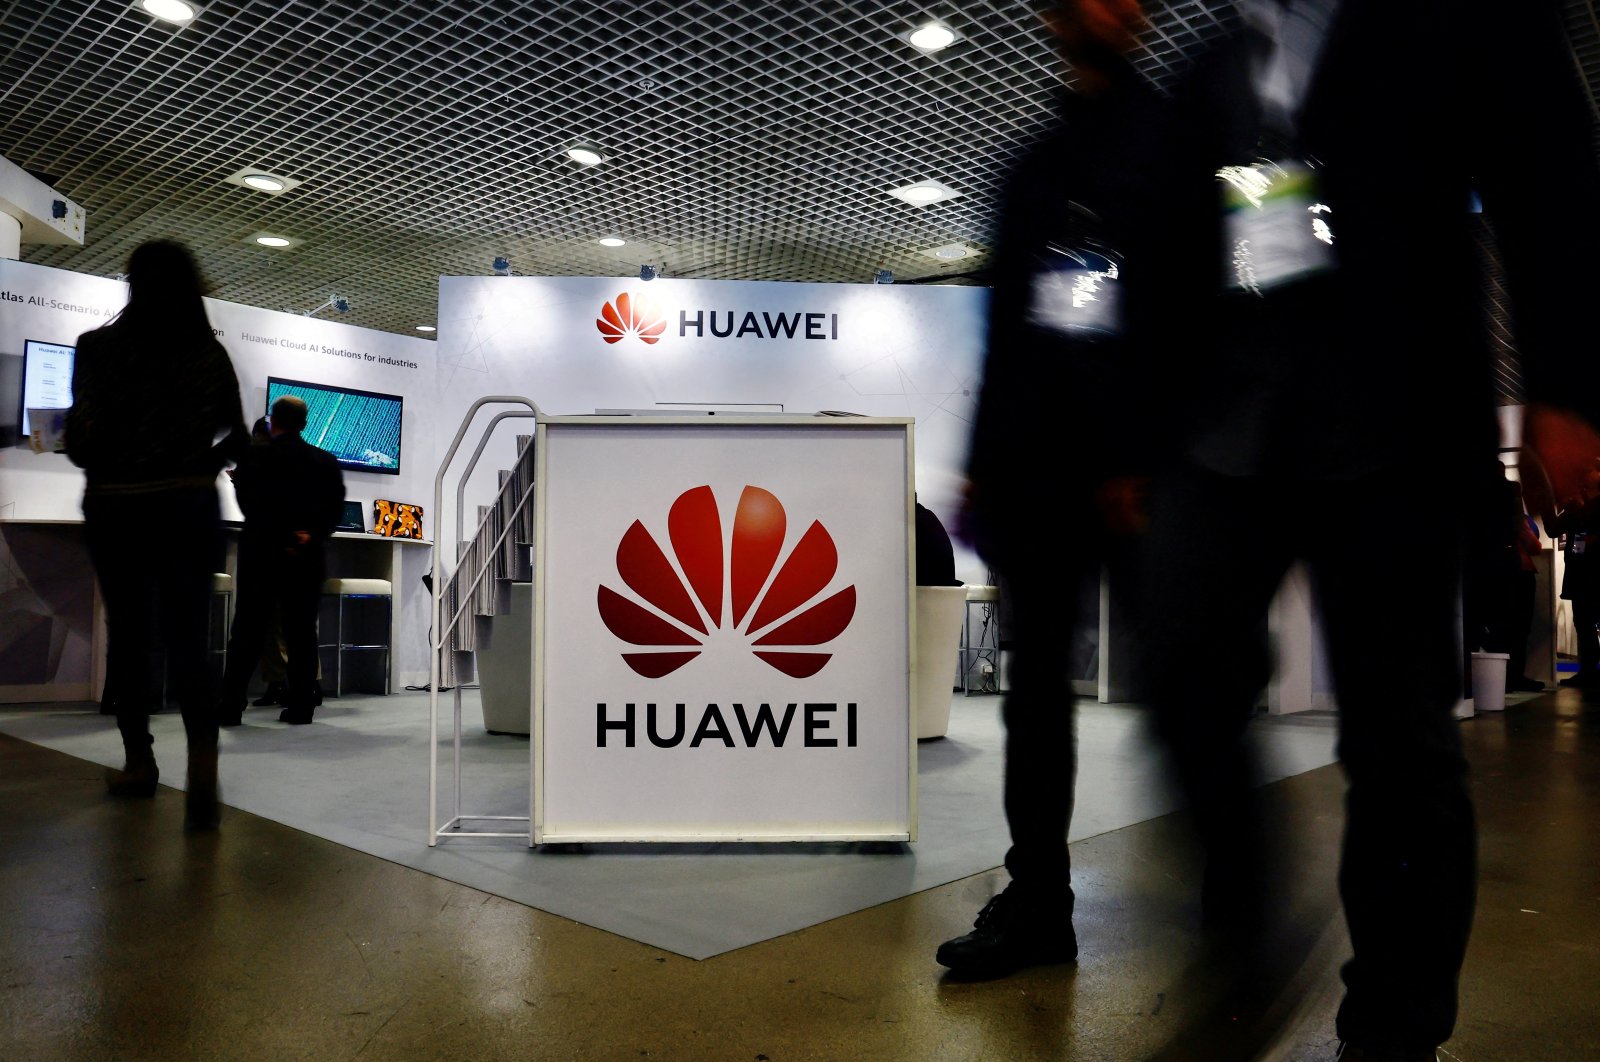 EU says to stop using services running China’s Huawei, ZTE equipment